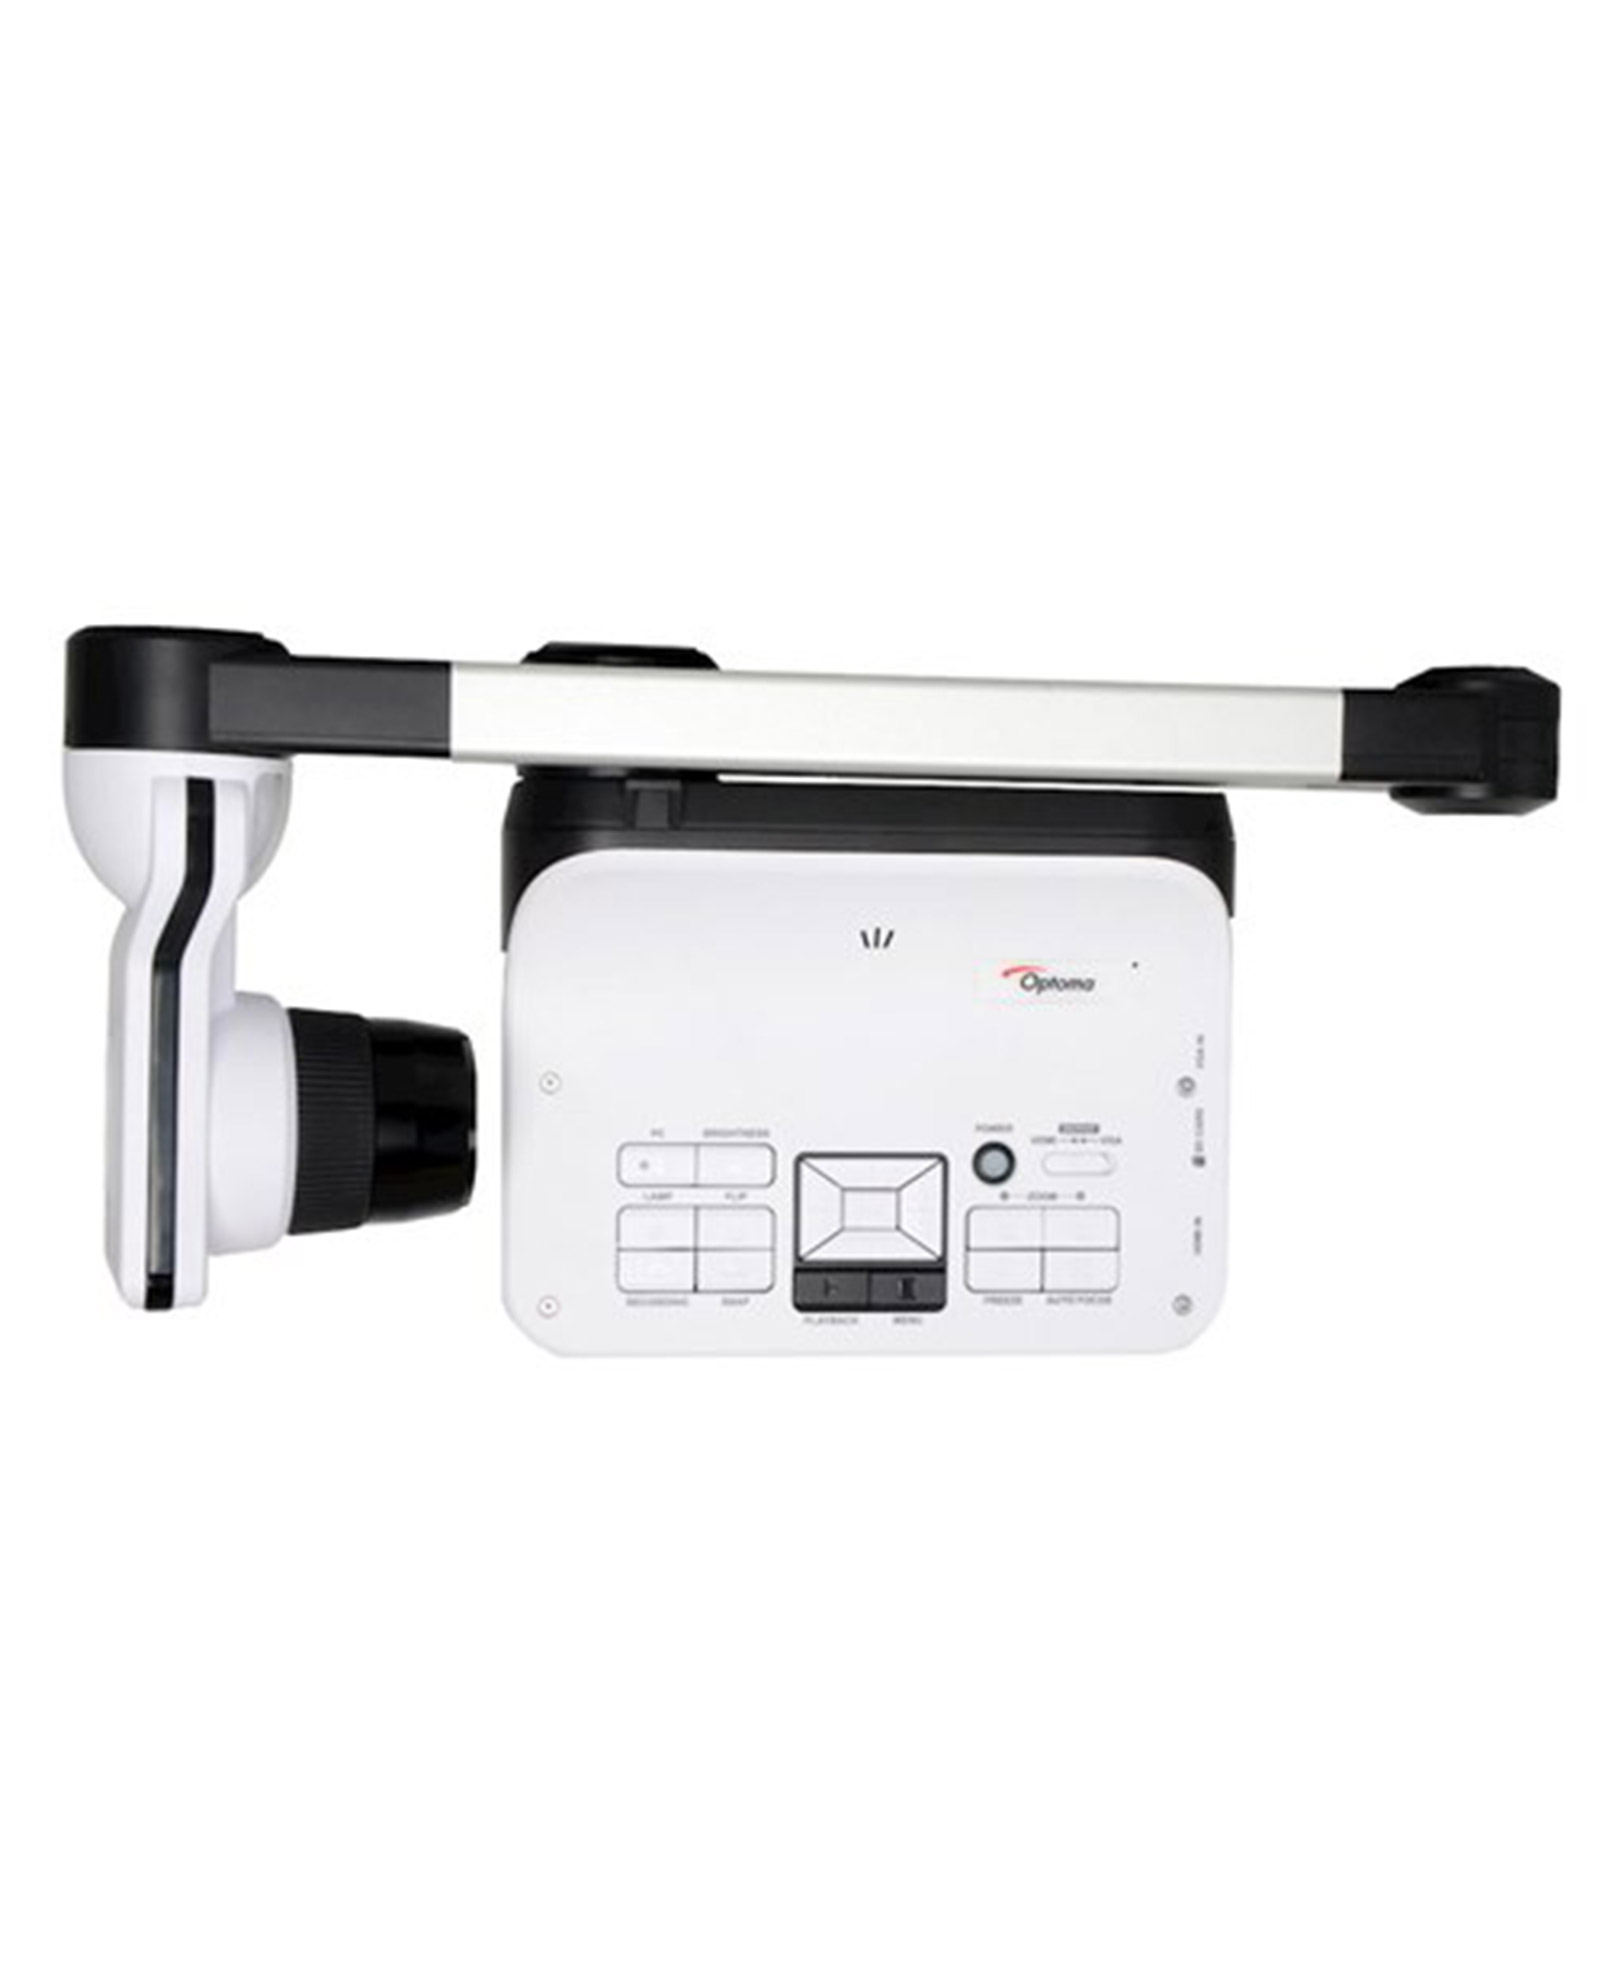 Optoma Dc550 Document Camera 8mp Fhd With Stand 3